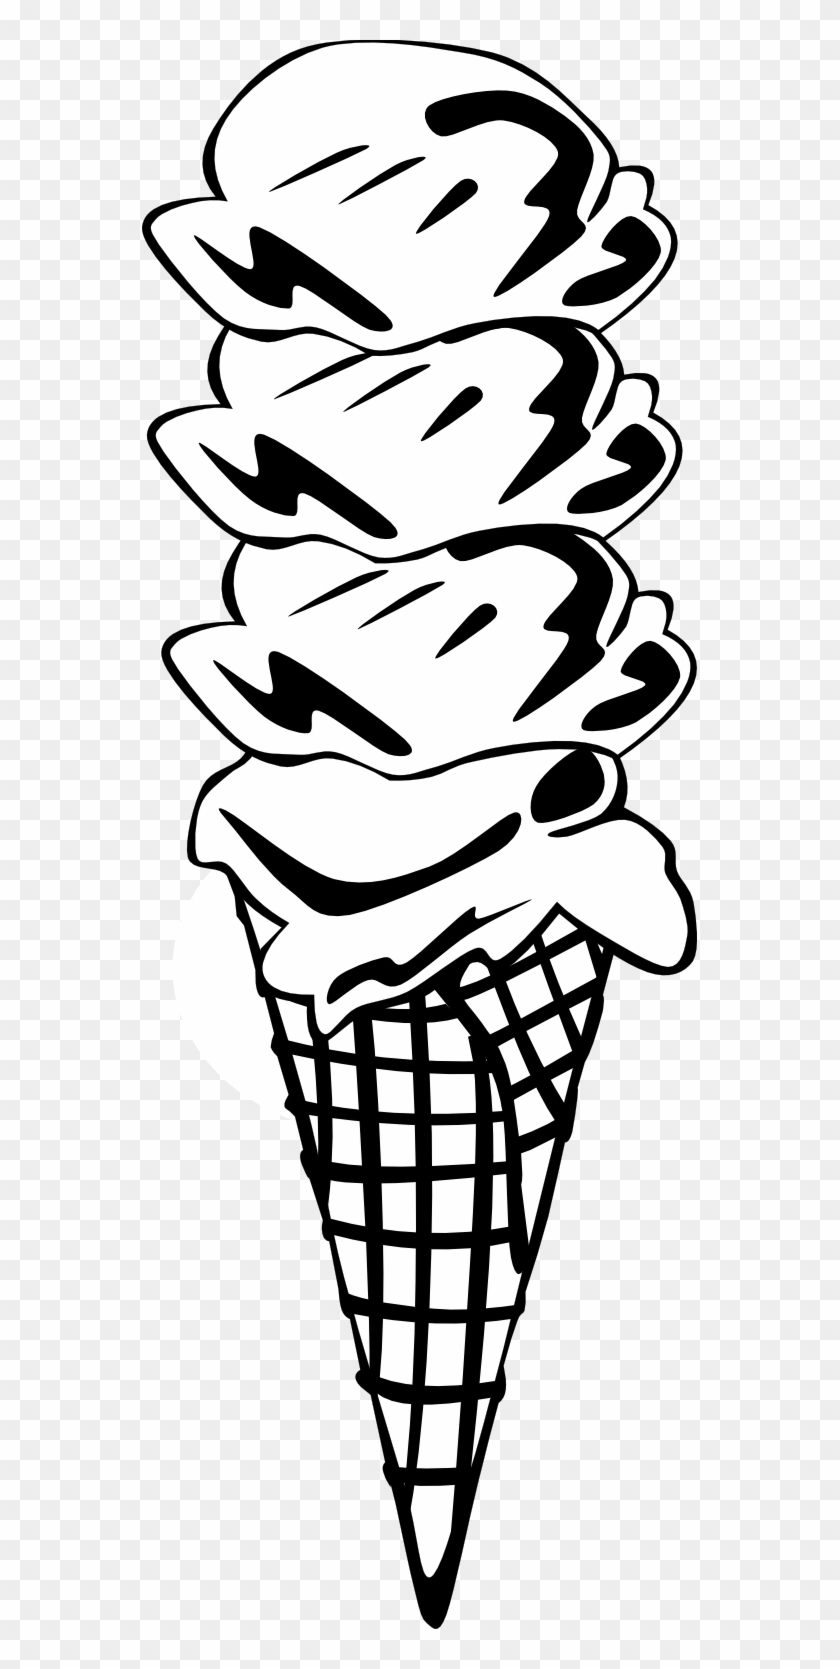 Png Royalty Free Stock Black And White Ice Cream Cone - Ice Cream Cone Clip Art Transparent Png #3133933